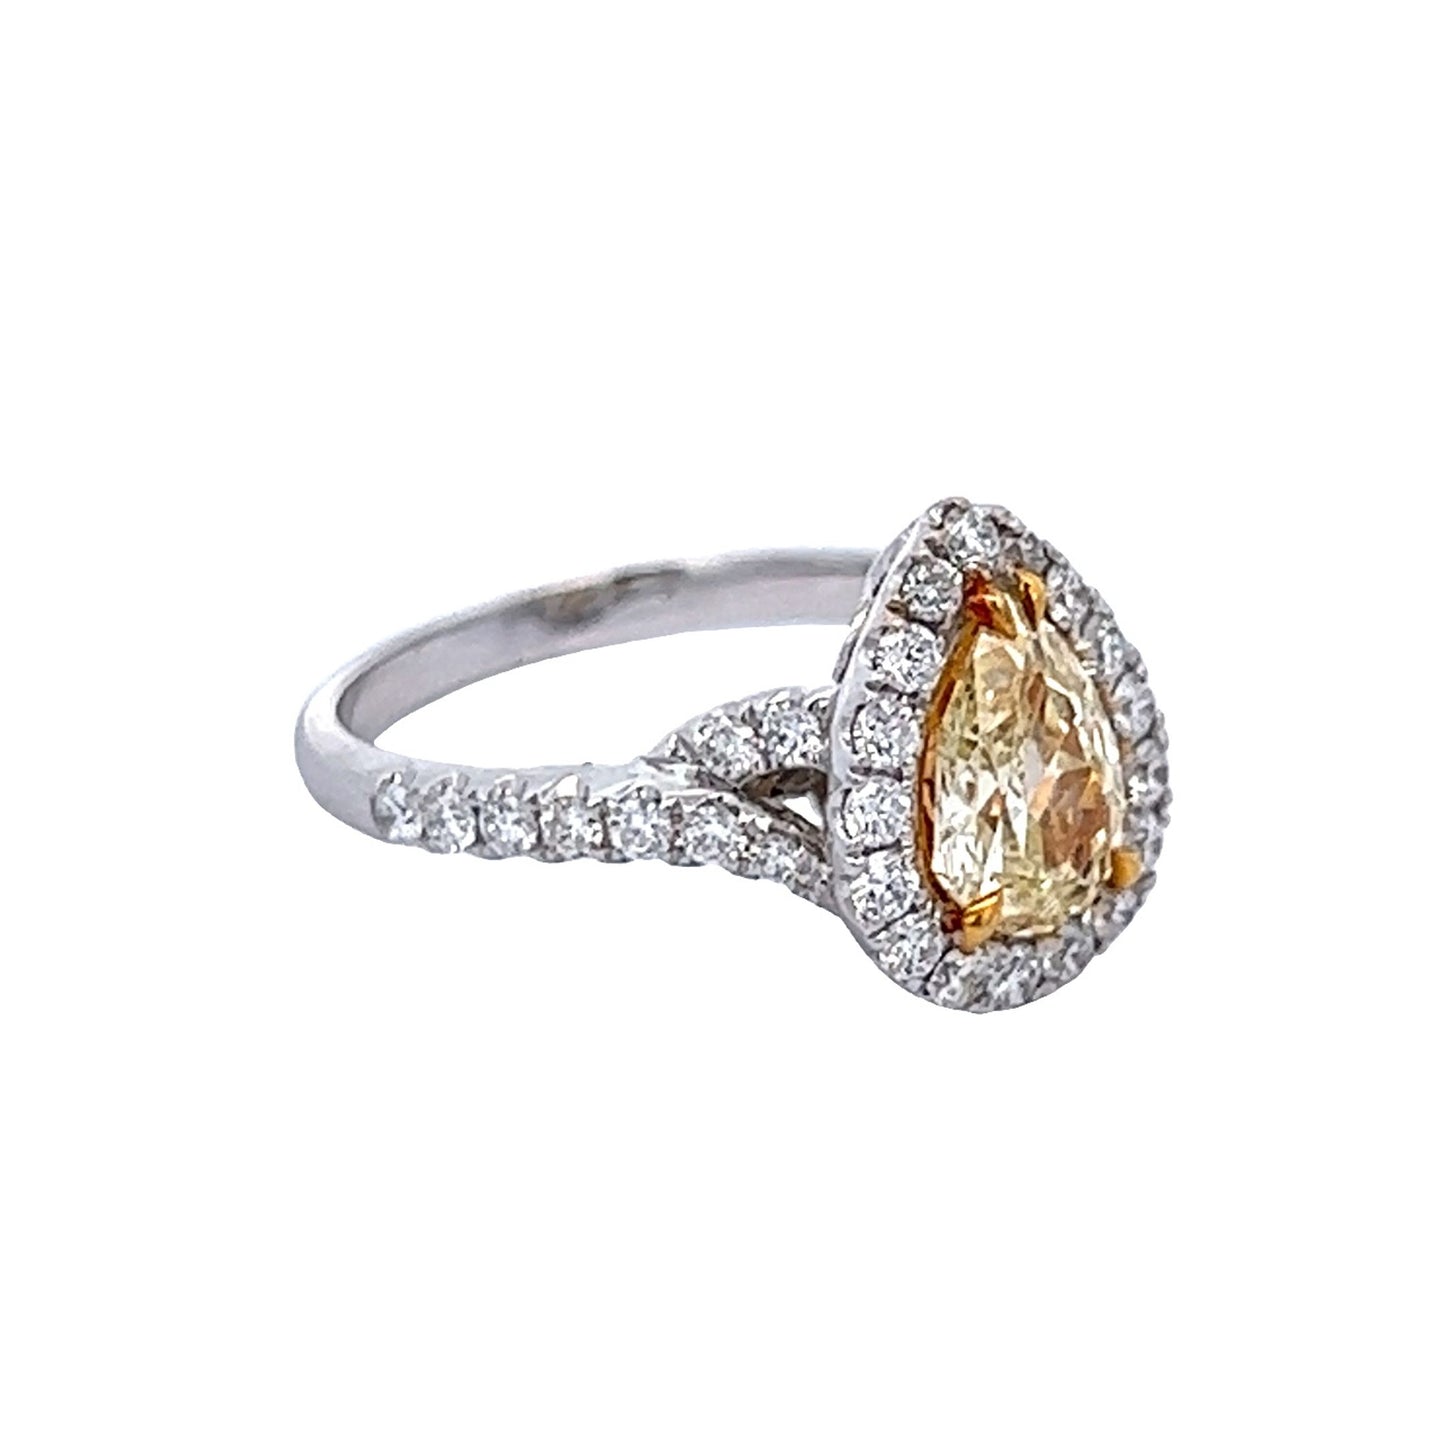 1.23 Cts. Pear Shape Fancy Yellow Natural Diamond Halo Ring